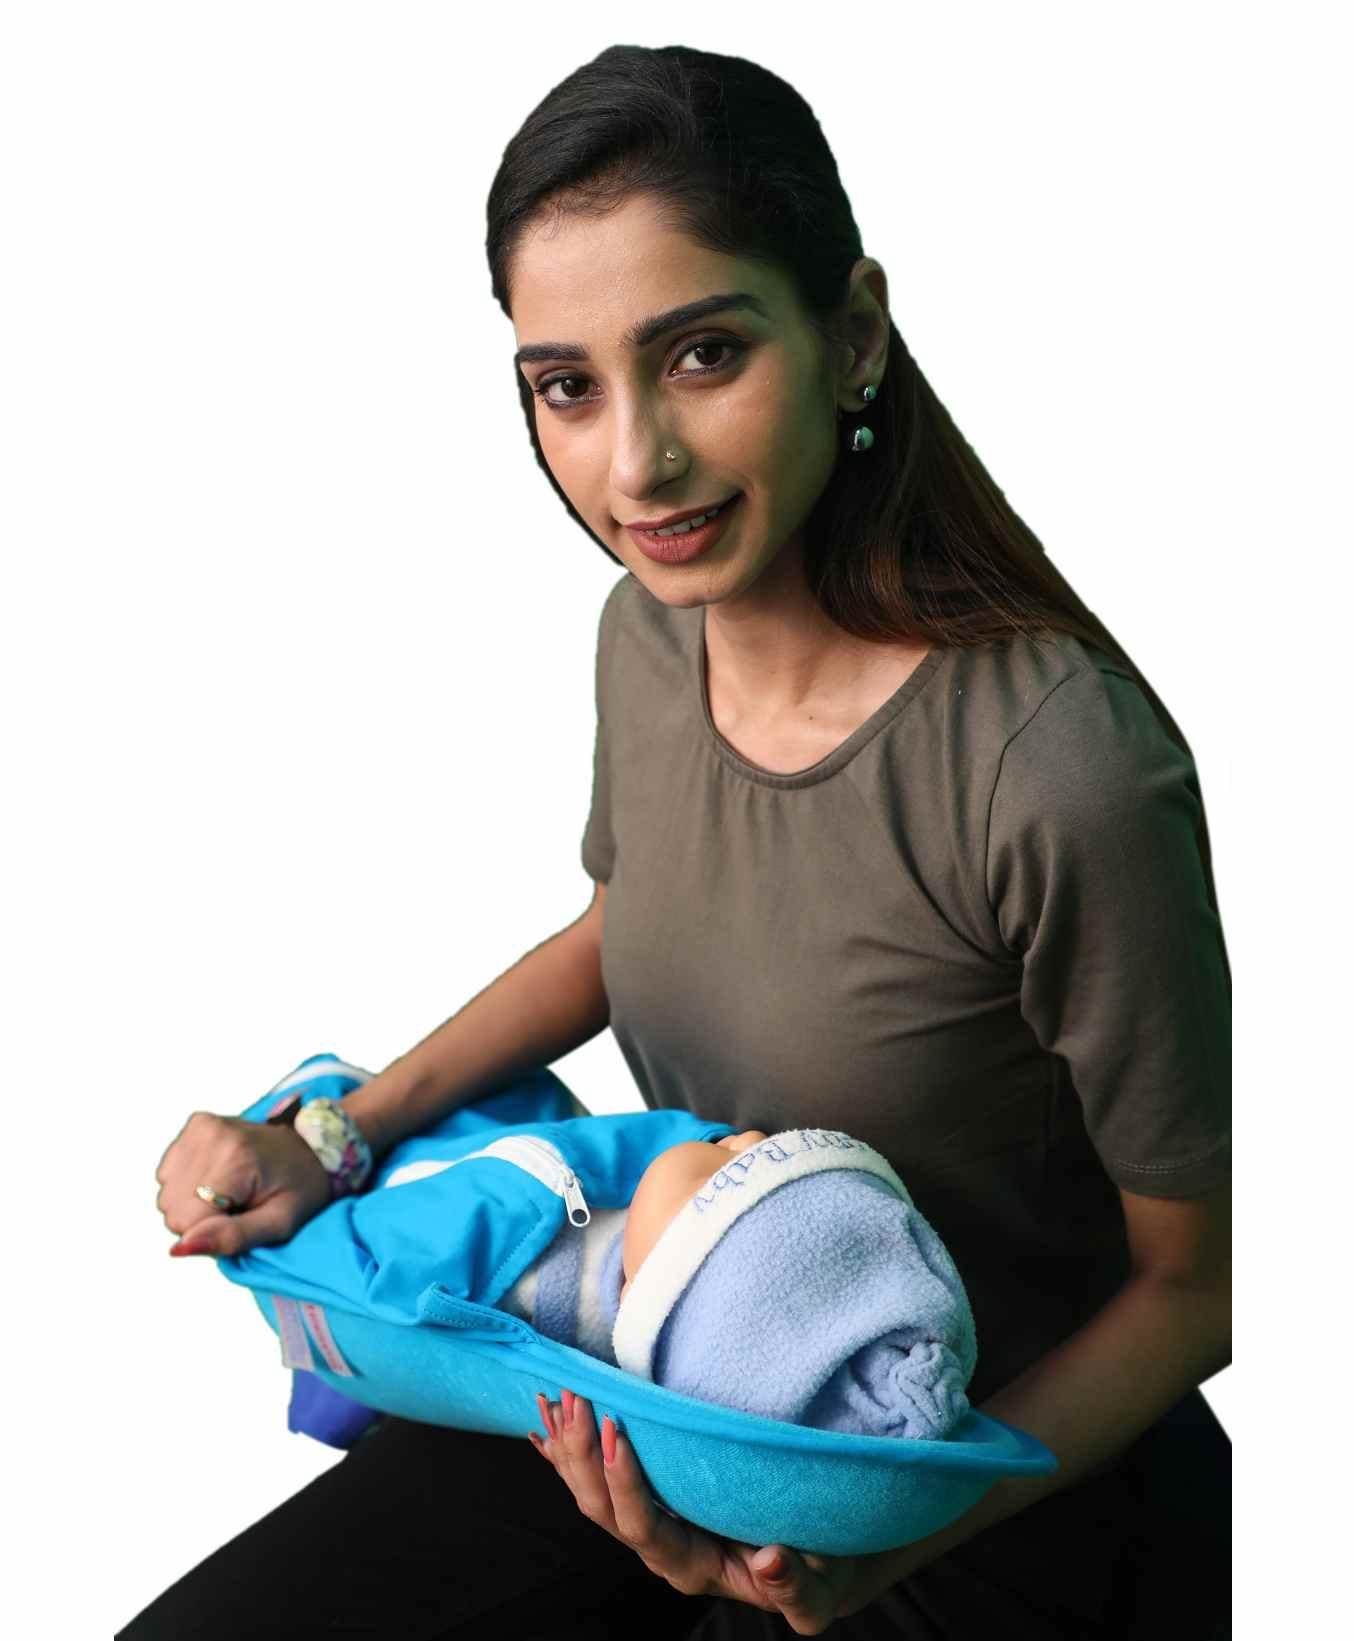 2-in-1 HOOPA Hooded Feeding Pillow L.Blue, Feeding Pillow with Cover, Nursing  pad with Baby Cover, Hoopa